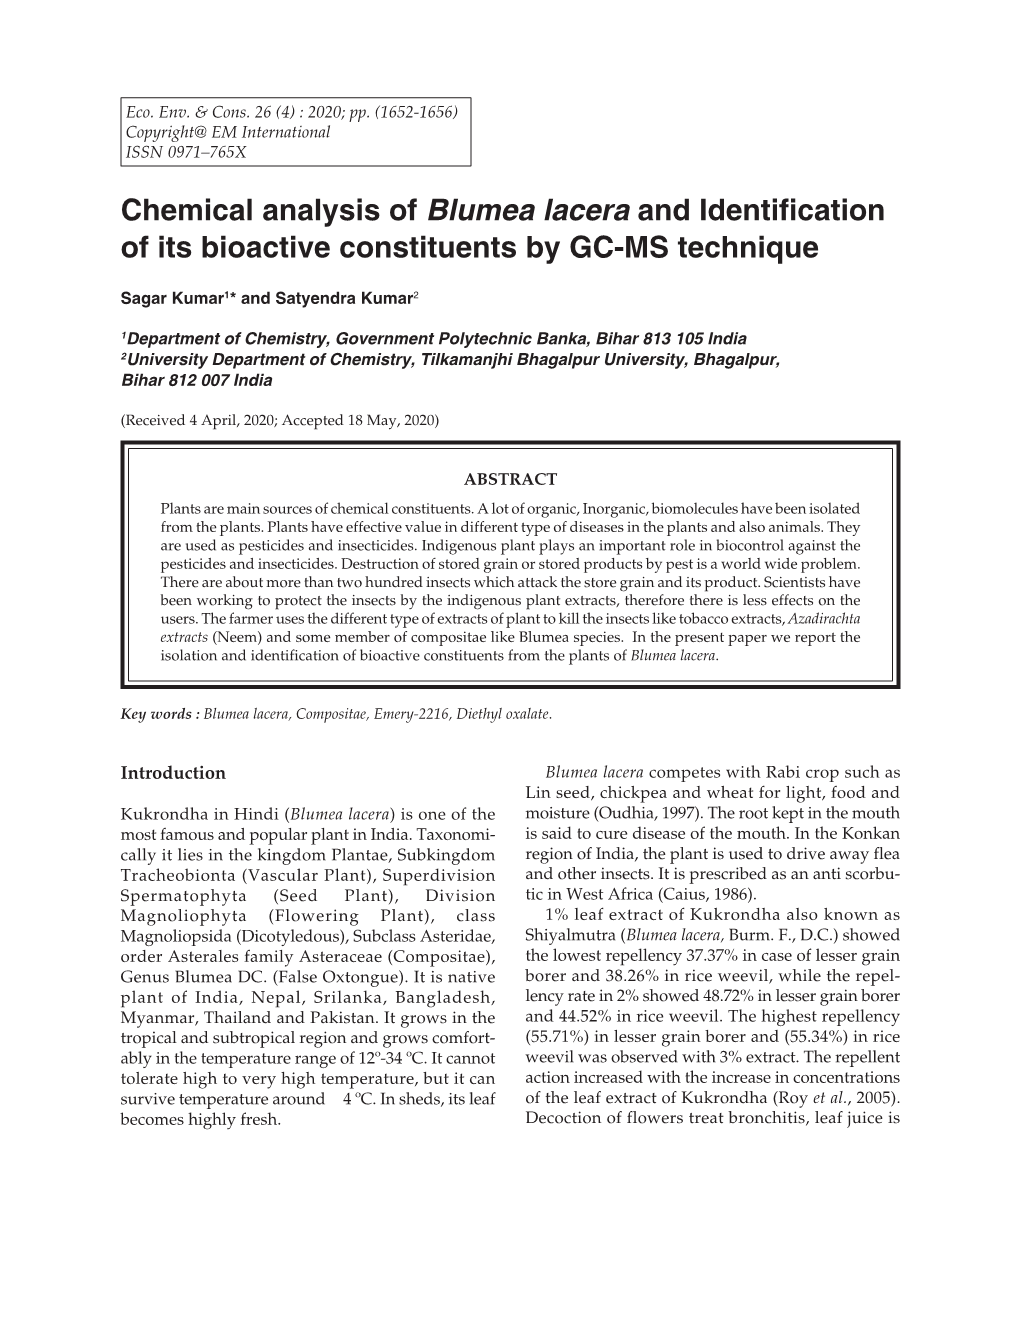 Chemical Analysis of Blumea Lacera and Identification of Its Bioactive Constituents by GC-MS Technique